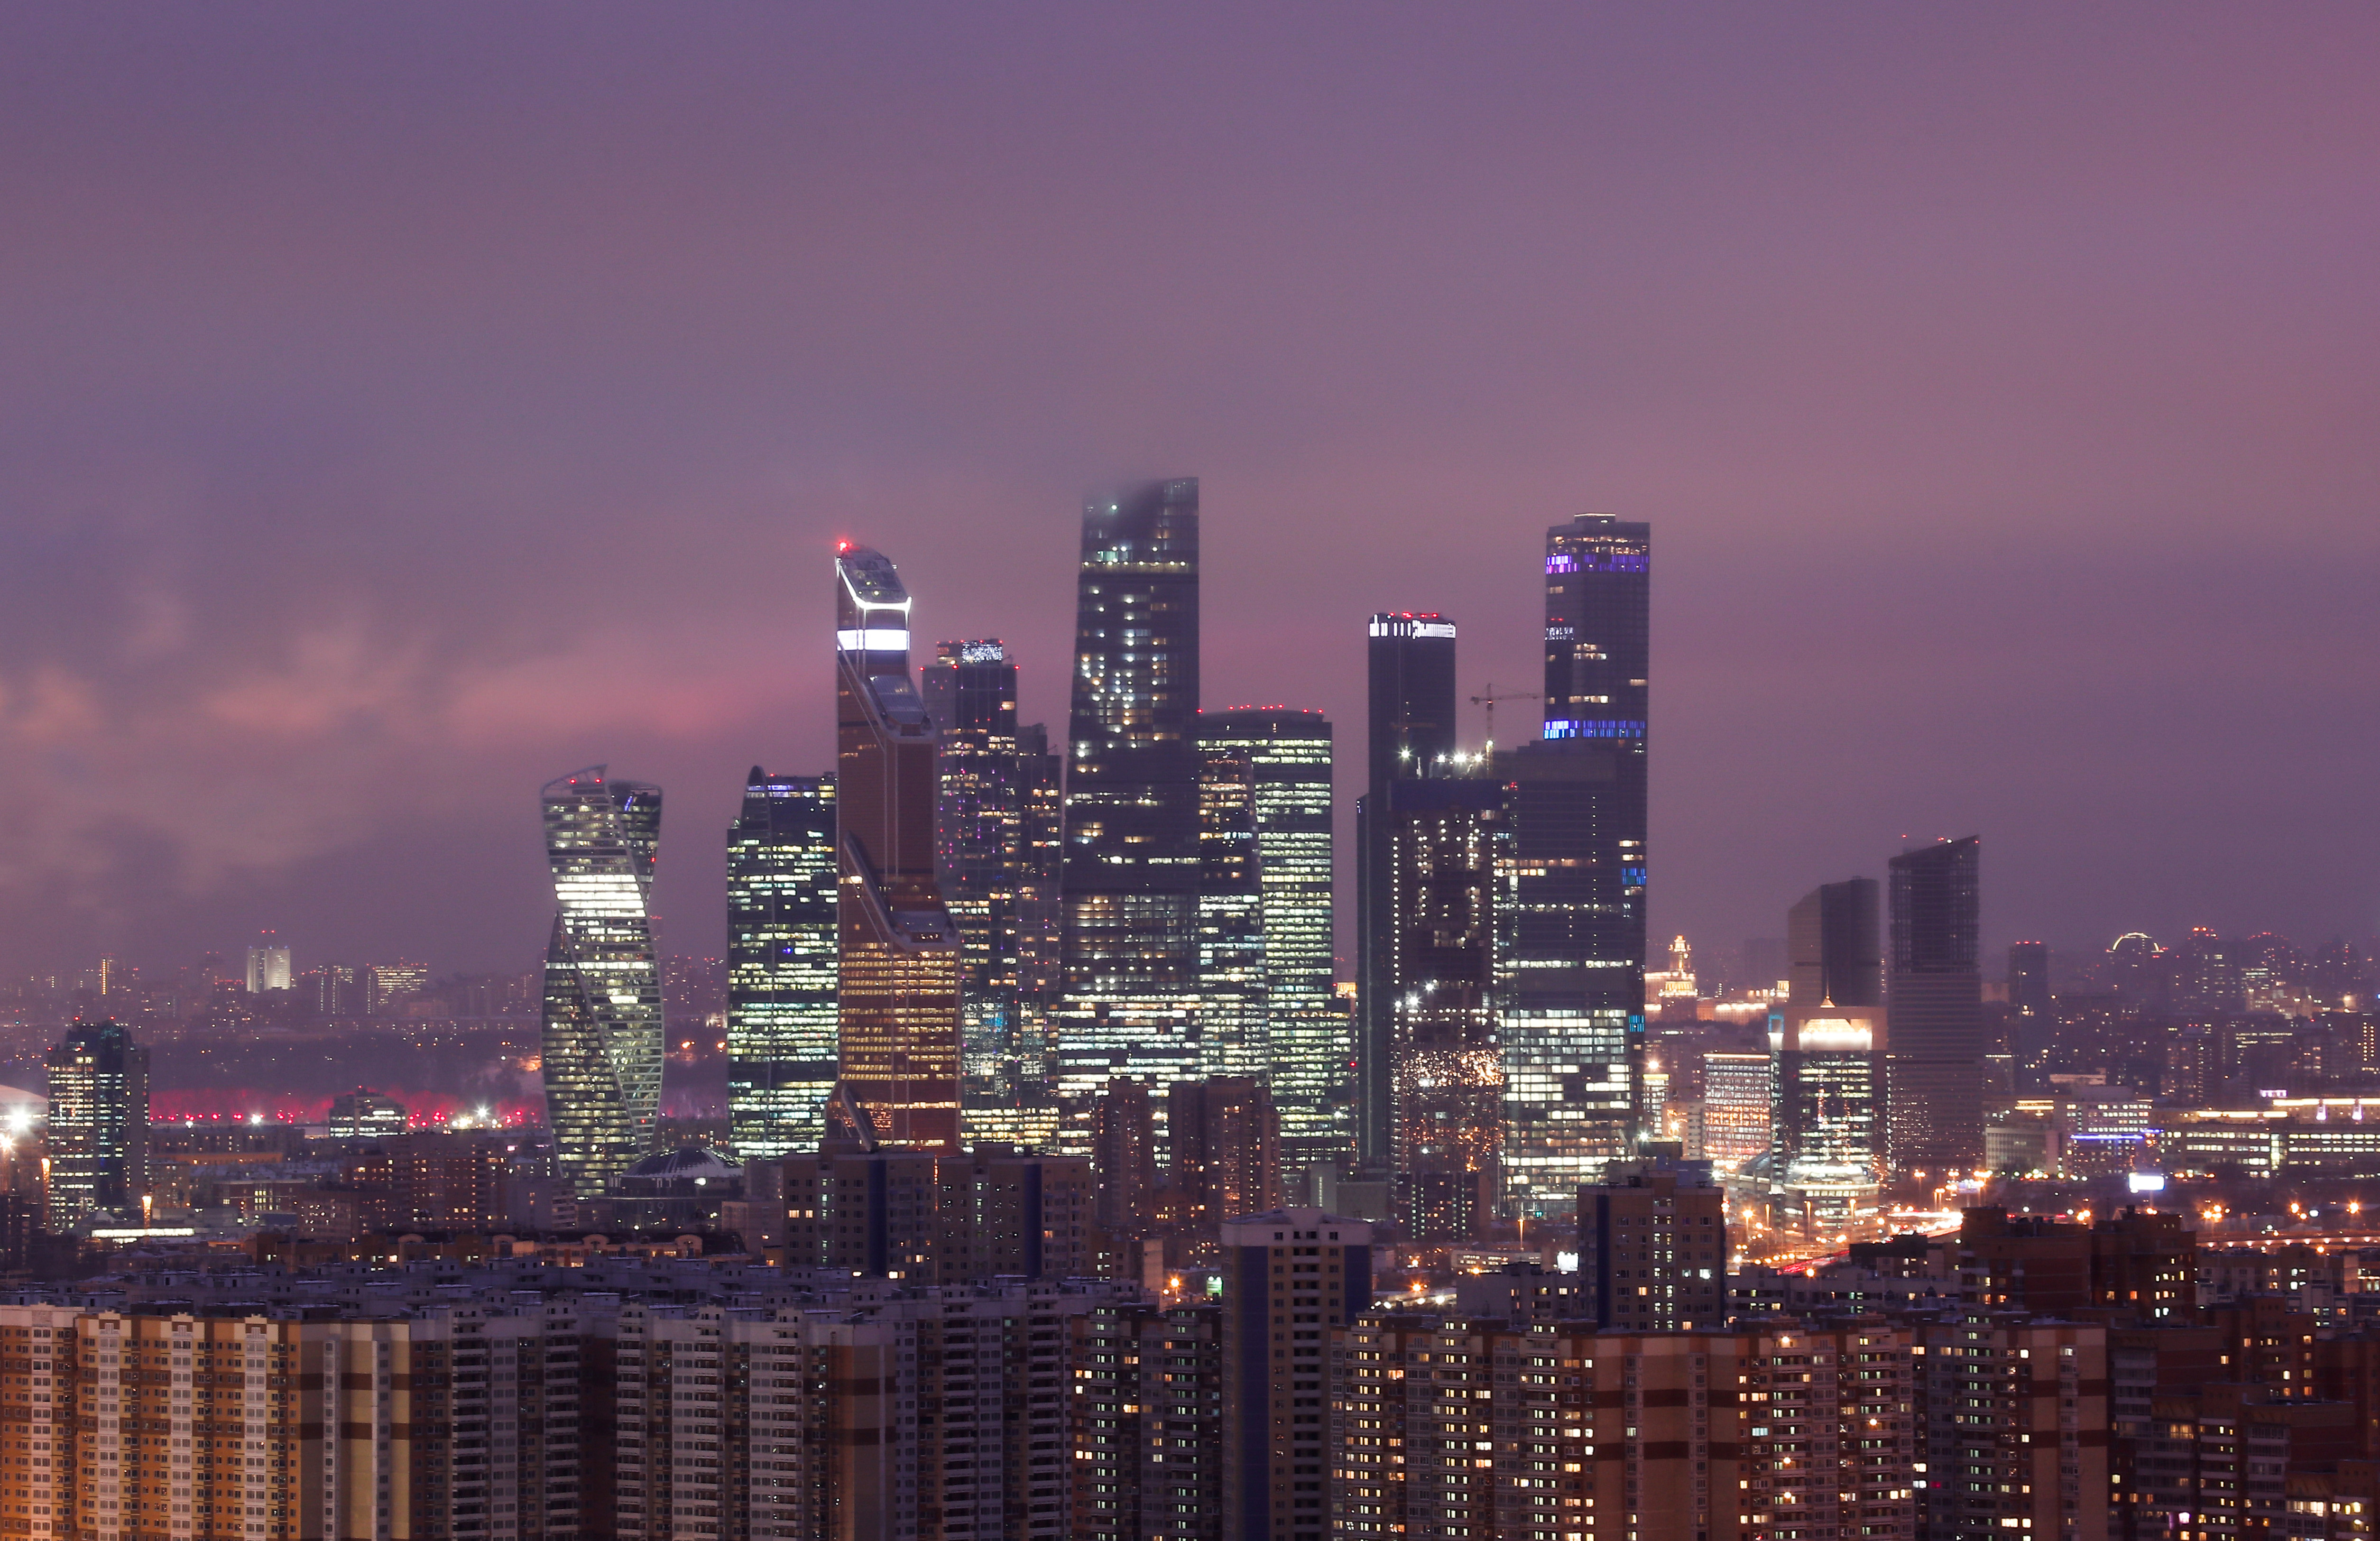 A general view of the Moscow International Business Center, also known as 